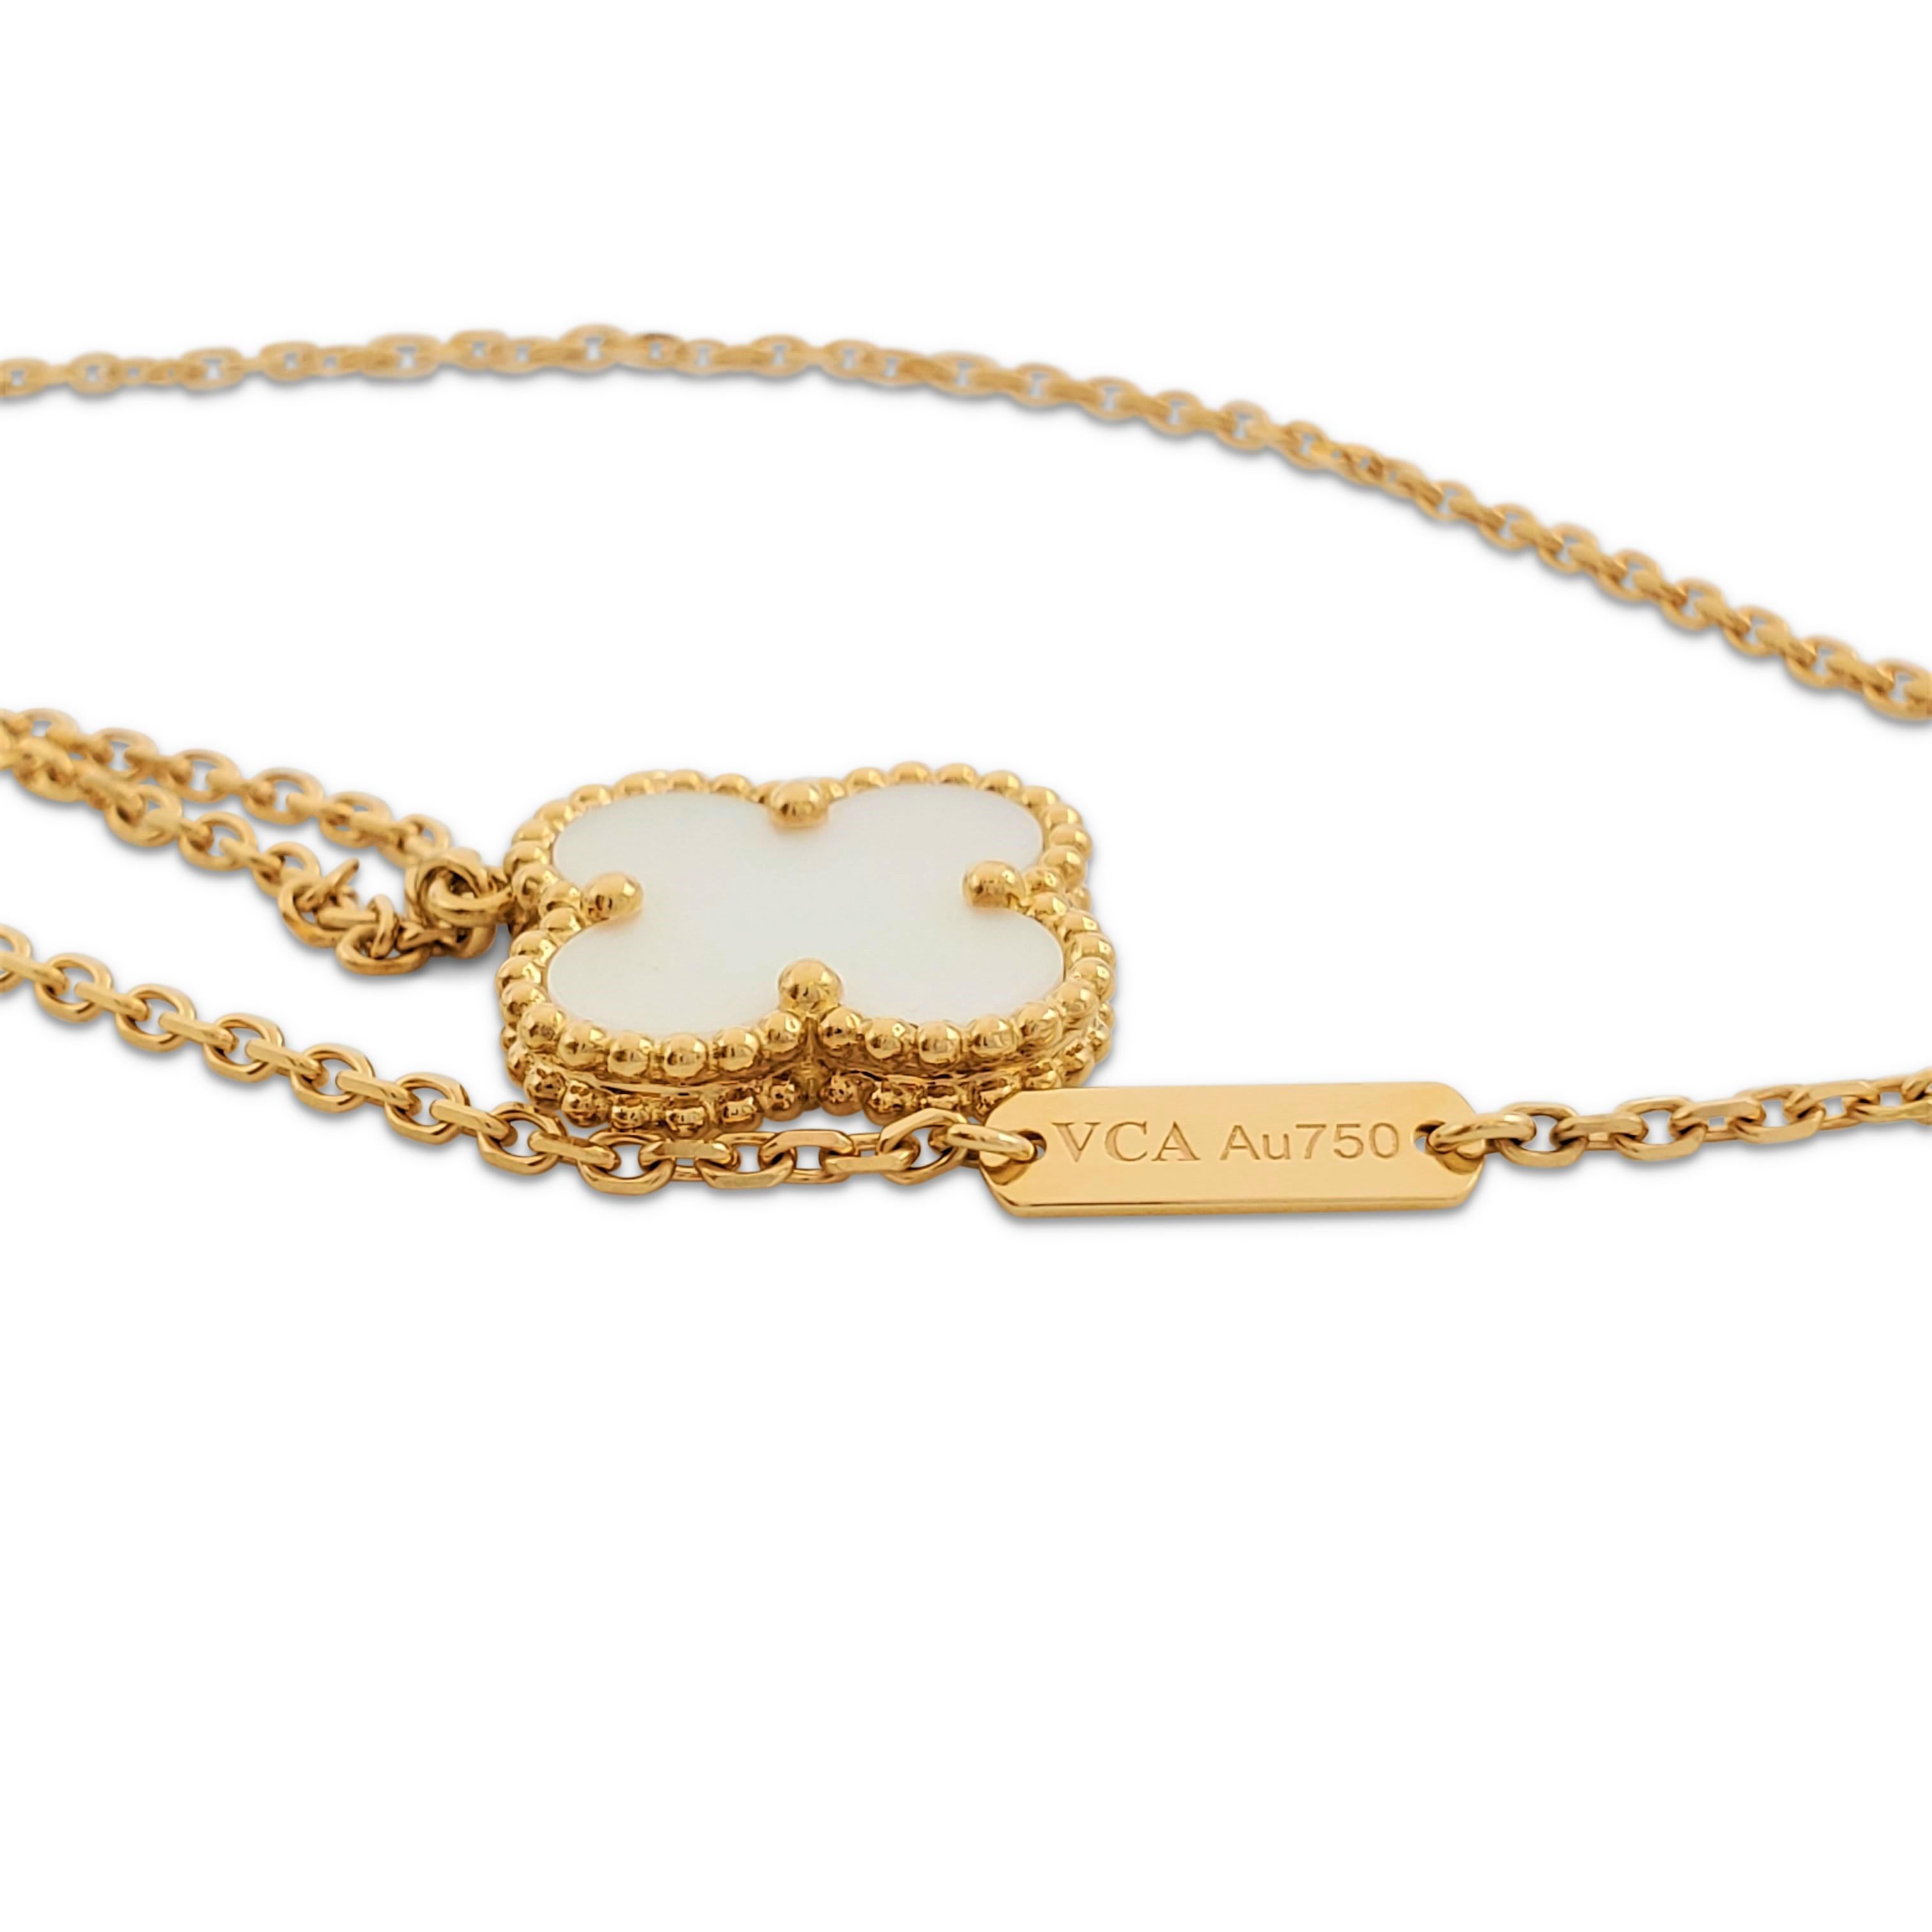 Uncut Van Cleef & Arpels 'Vintage Alhambra' Yellow Gold and Mother of Pearl Necklace